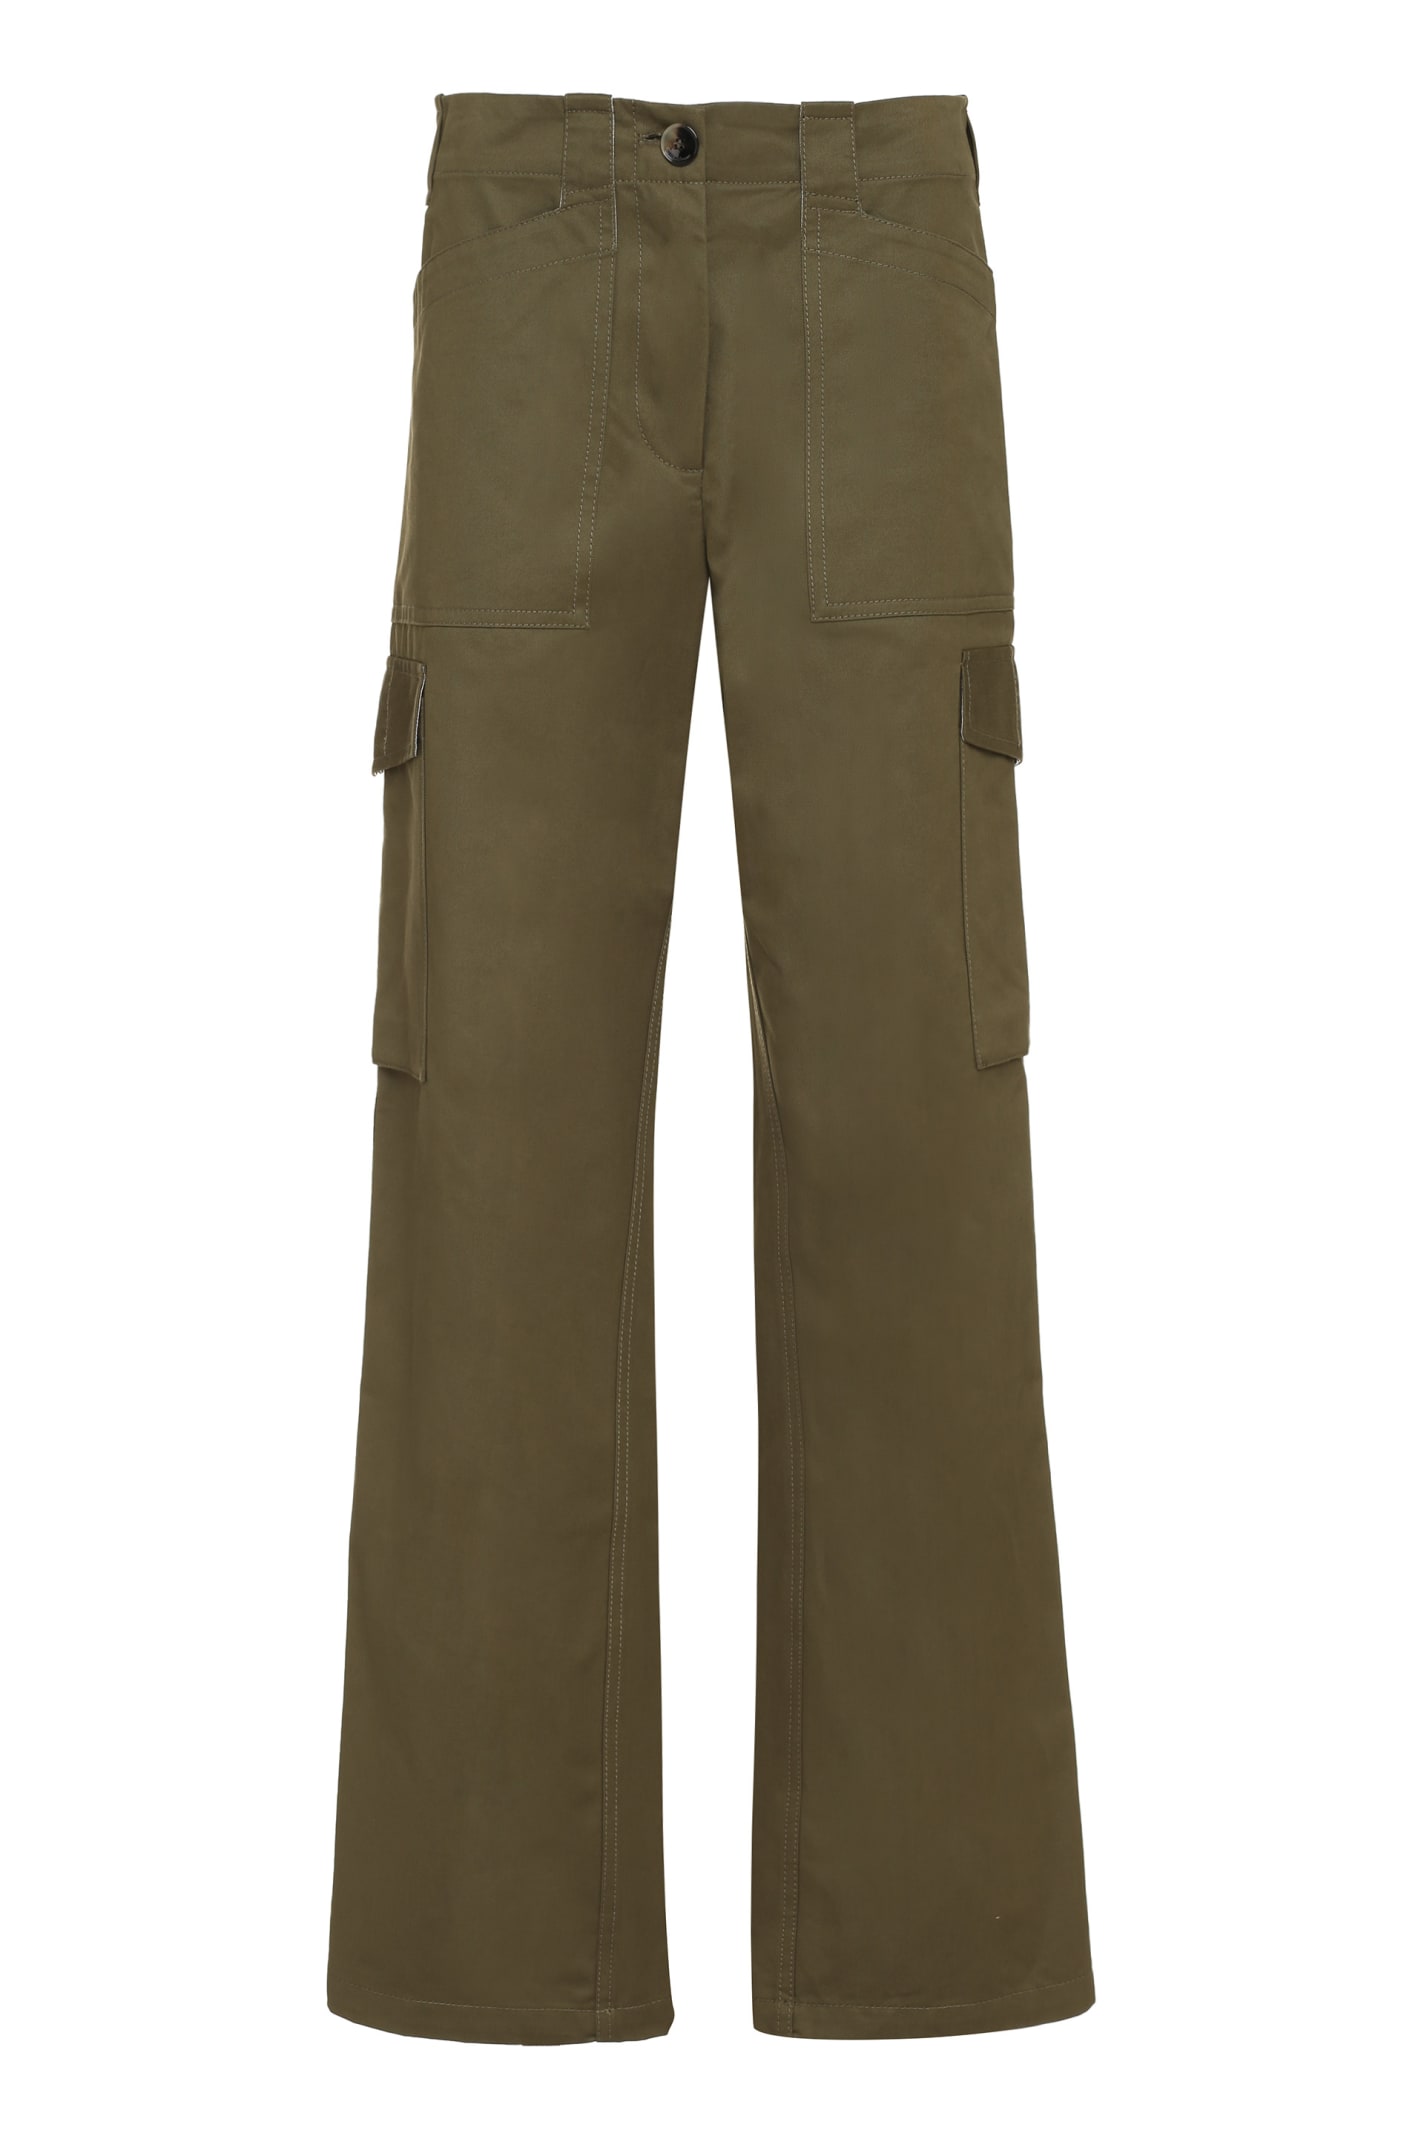 Paco Rabanne Cotton Cargo-trousers